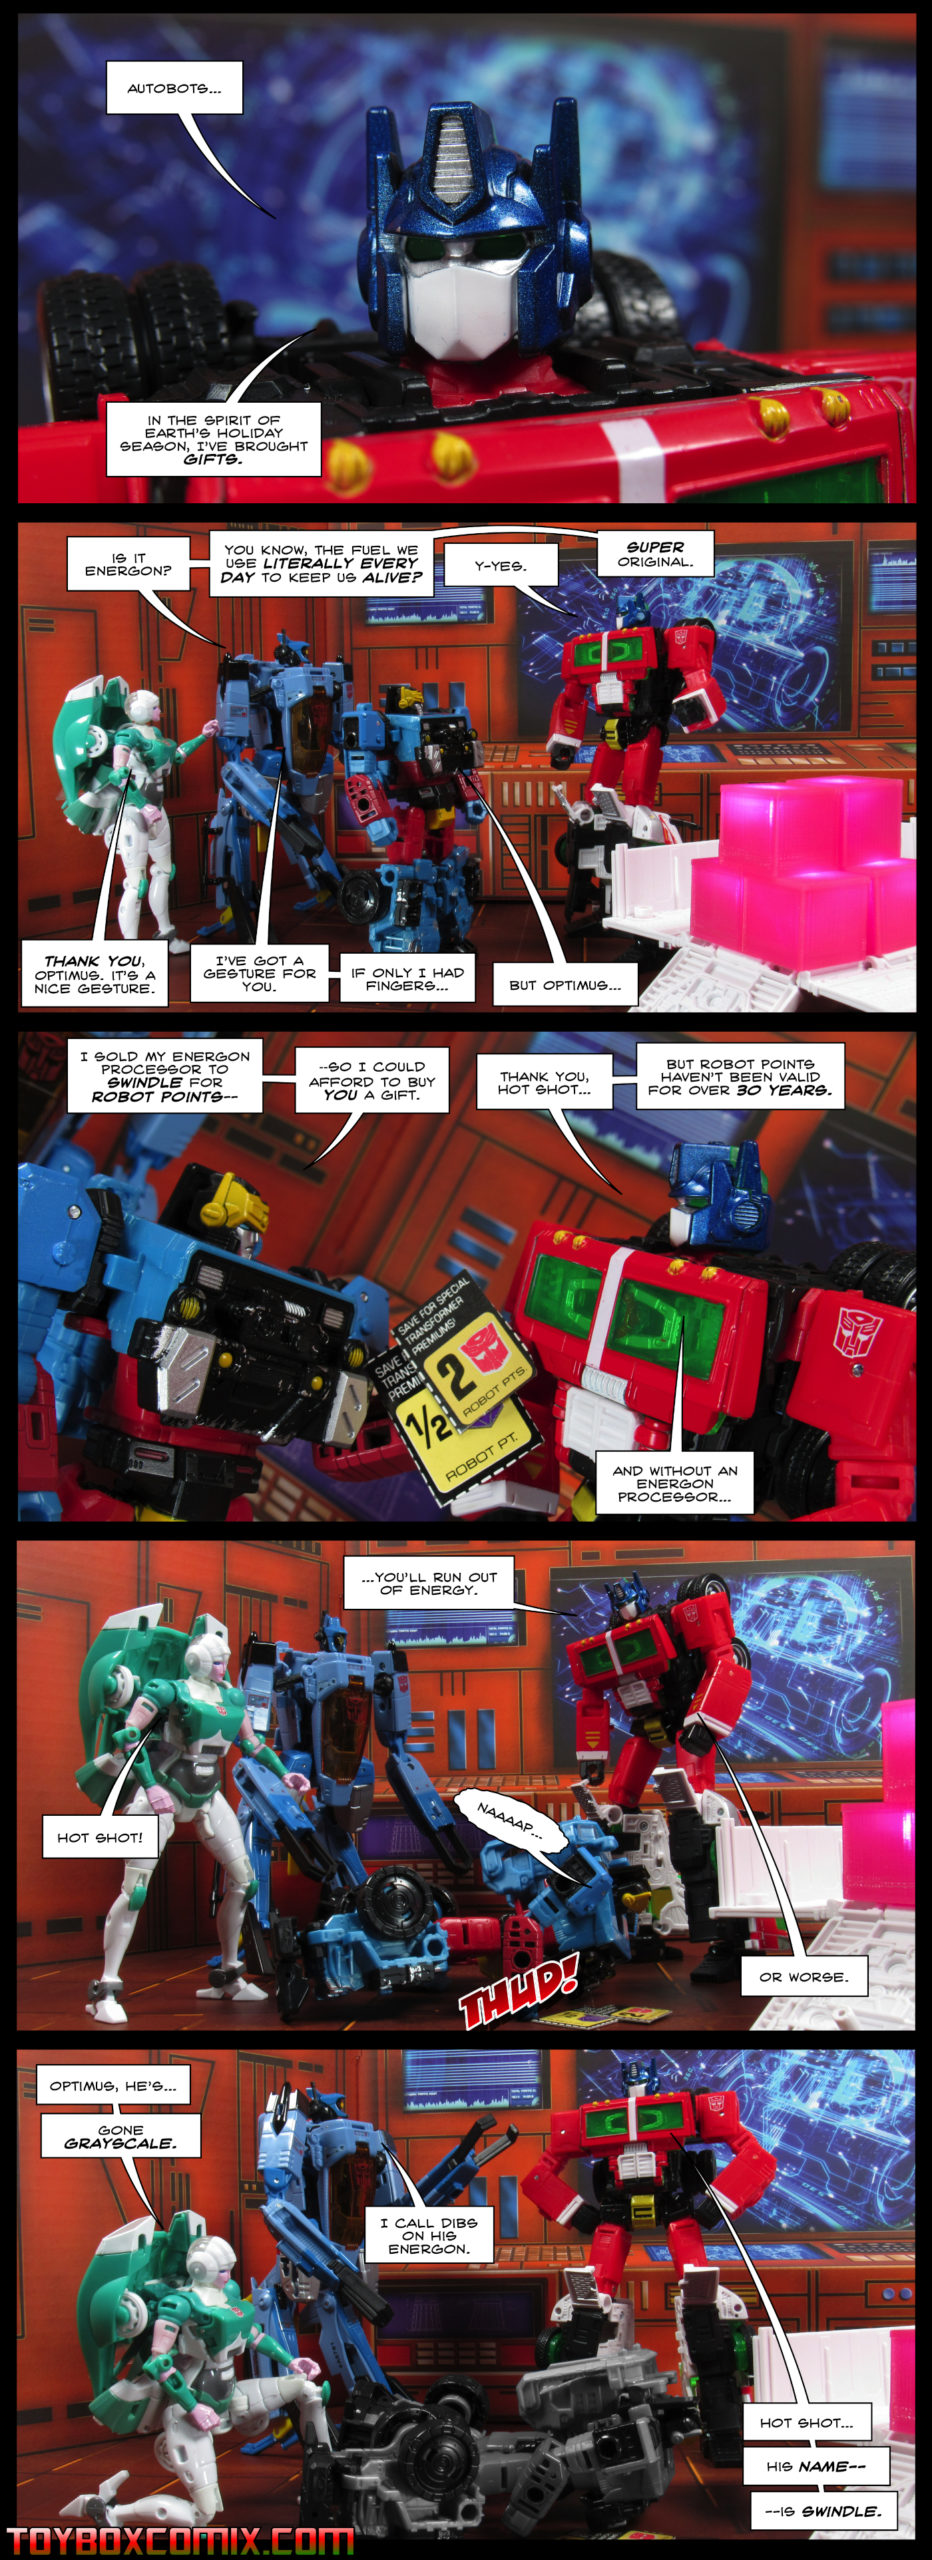 First panel: Optimus Prime: “Autobots, in the spirit of Earth’s holiday season, I’ve brought gifts.” Second panel: Whirl: “Is it energon? You know, the fuel we use literally every day to keep us alive?” Optimus Prime: “Y-yes.” Whirl: “Super original.” Lifeline: “Thank you, Optimus. It’s a nice gesture.” Whirl: “I’ve got a gesture for you. If only I had fingers…” Hot Shot: “But Optimus…” Third panel: Hot Shot: “I sold my energon processor to Swindle for Robot Points so I could afford to buy you a gift.” Optimus: “Thank you, Hot Shot, but robot points haven’t been valid for over 30 years. And without an energon processor…” Fourth panel: Optimus: “You’ll run out of energy.” Hot Shot collapses with a thud. Lifeline: “Hot Shot!” Optimus: “Or worse.” Fifth panel: Lifeline: “Optimus he’s gone grayscale!” Hot Shot is on the floor, his color gone. Whirl: “I call dibs on his energon.” Optimus: “Hot Shot…his name…is Swindle!”